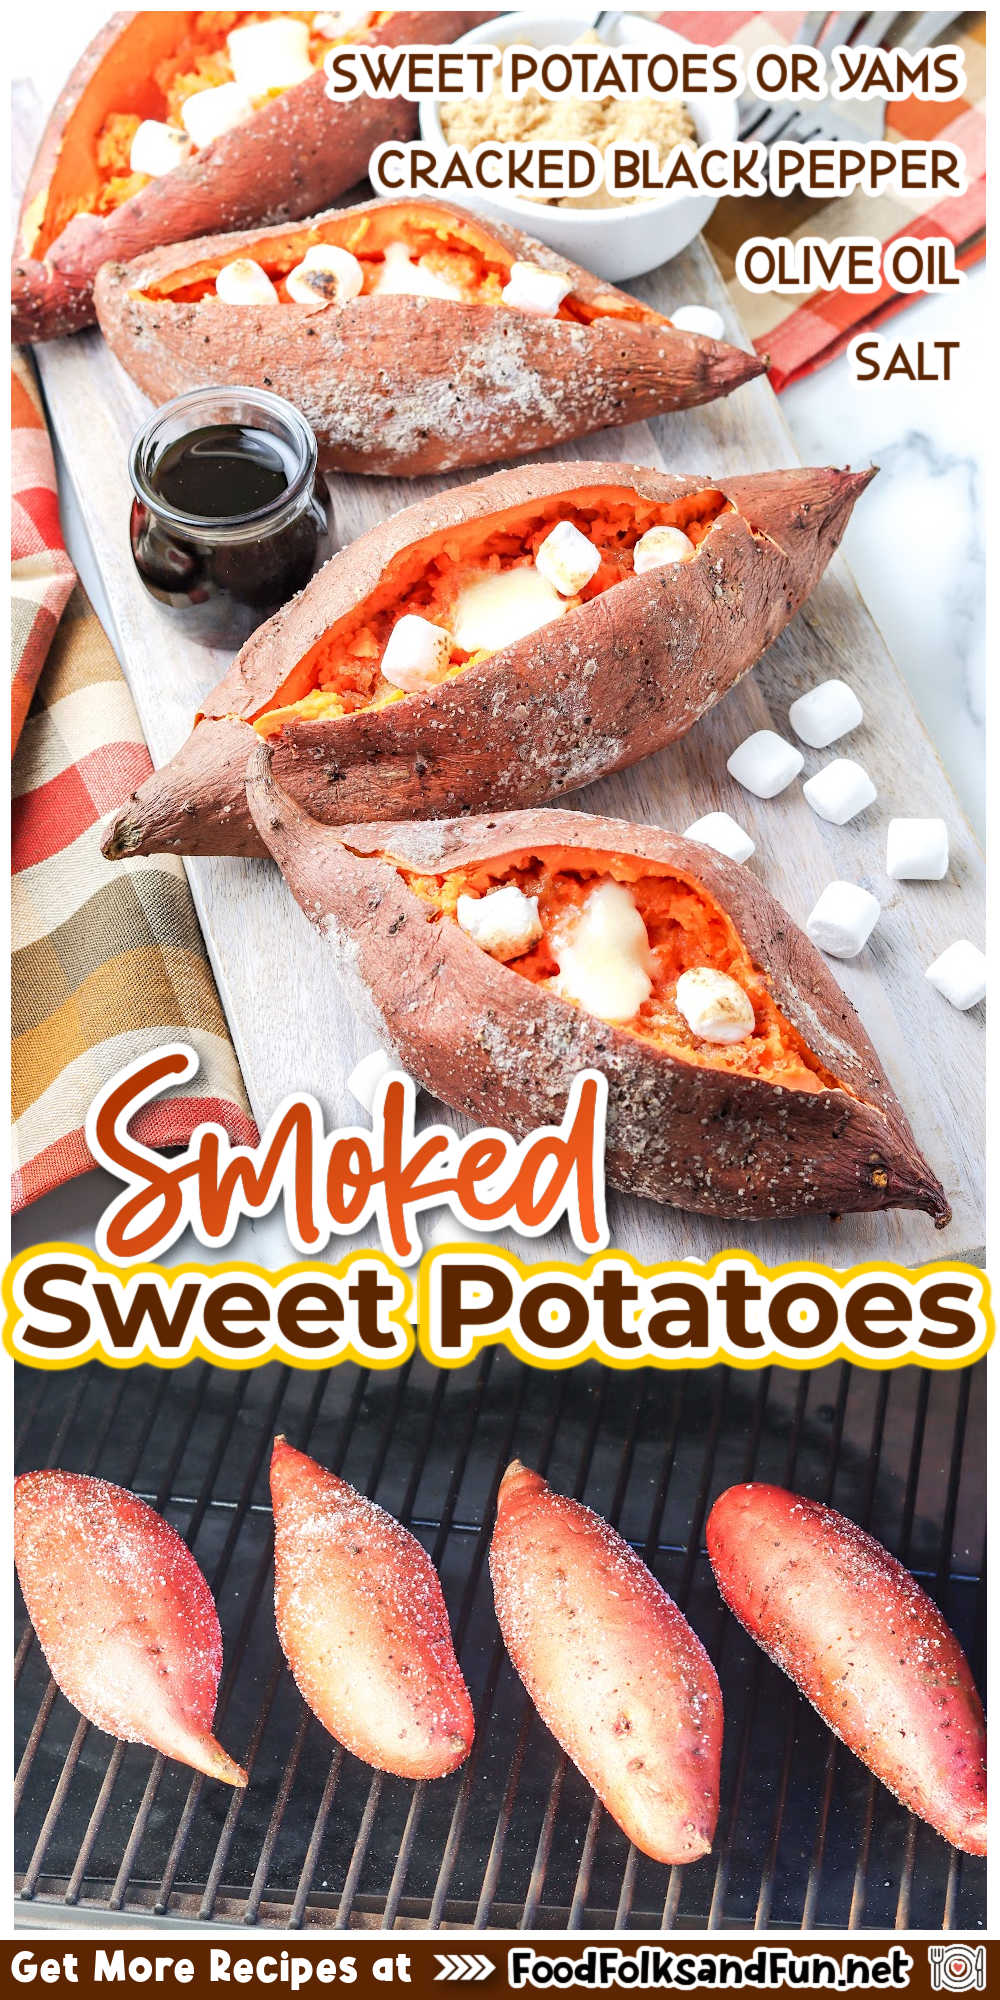 Transform meals with these Smoked Sweet Potatoes. They're smoky, creamy, and a surefire crowd-pleaser for flavor-packed meals. via @foodfolksandfun